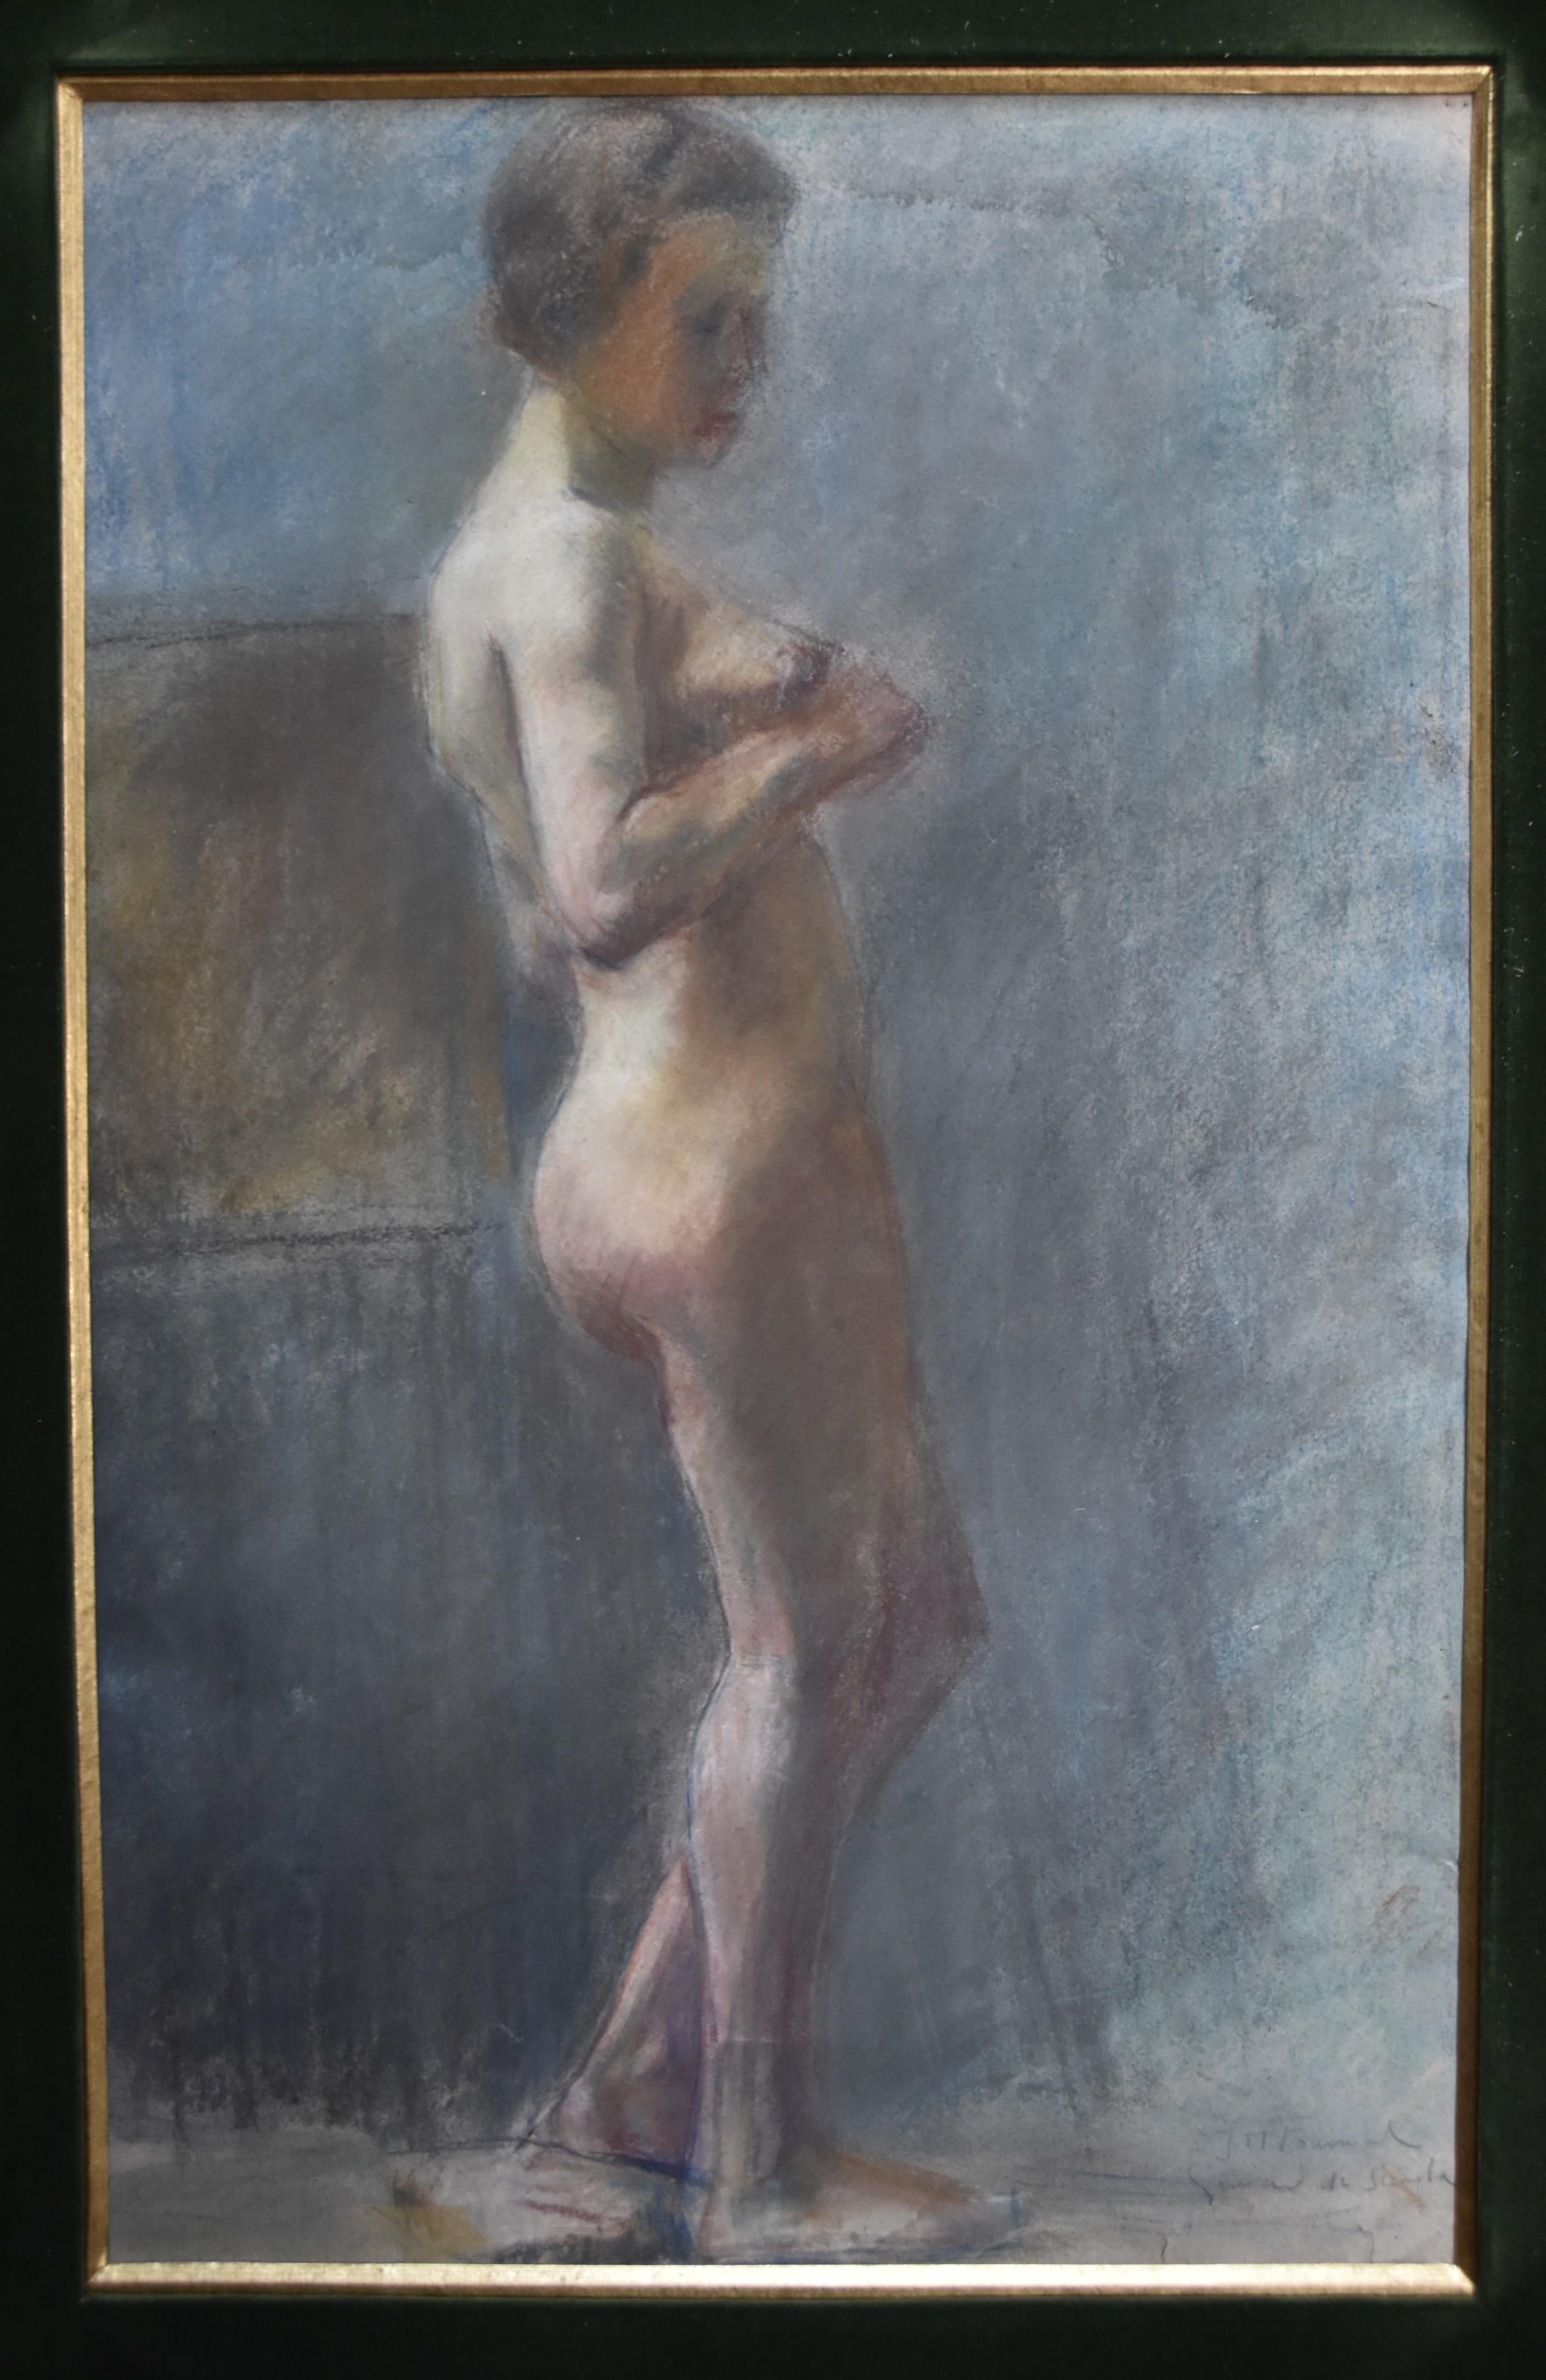 L V Guirand de Scevola (1871-1950) A young naked woman standing , Signed pastel - Art Deco Art by Lucien-Victor Guirand de Scévola